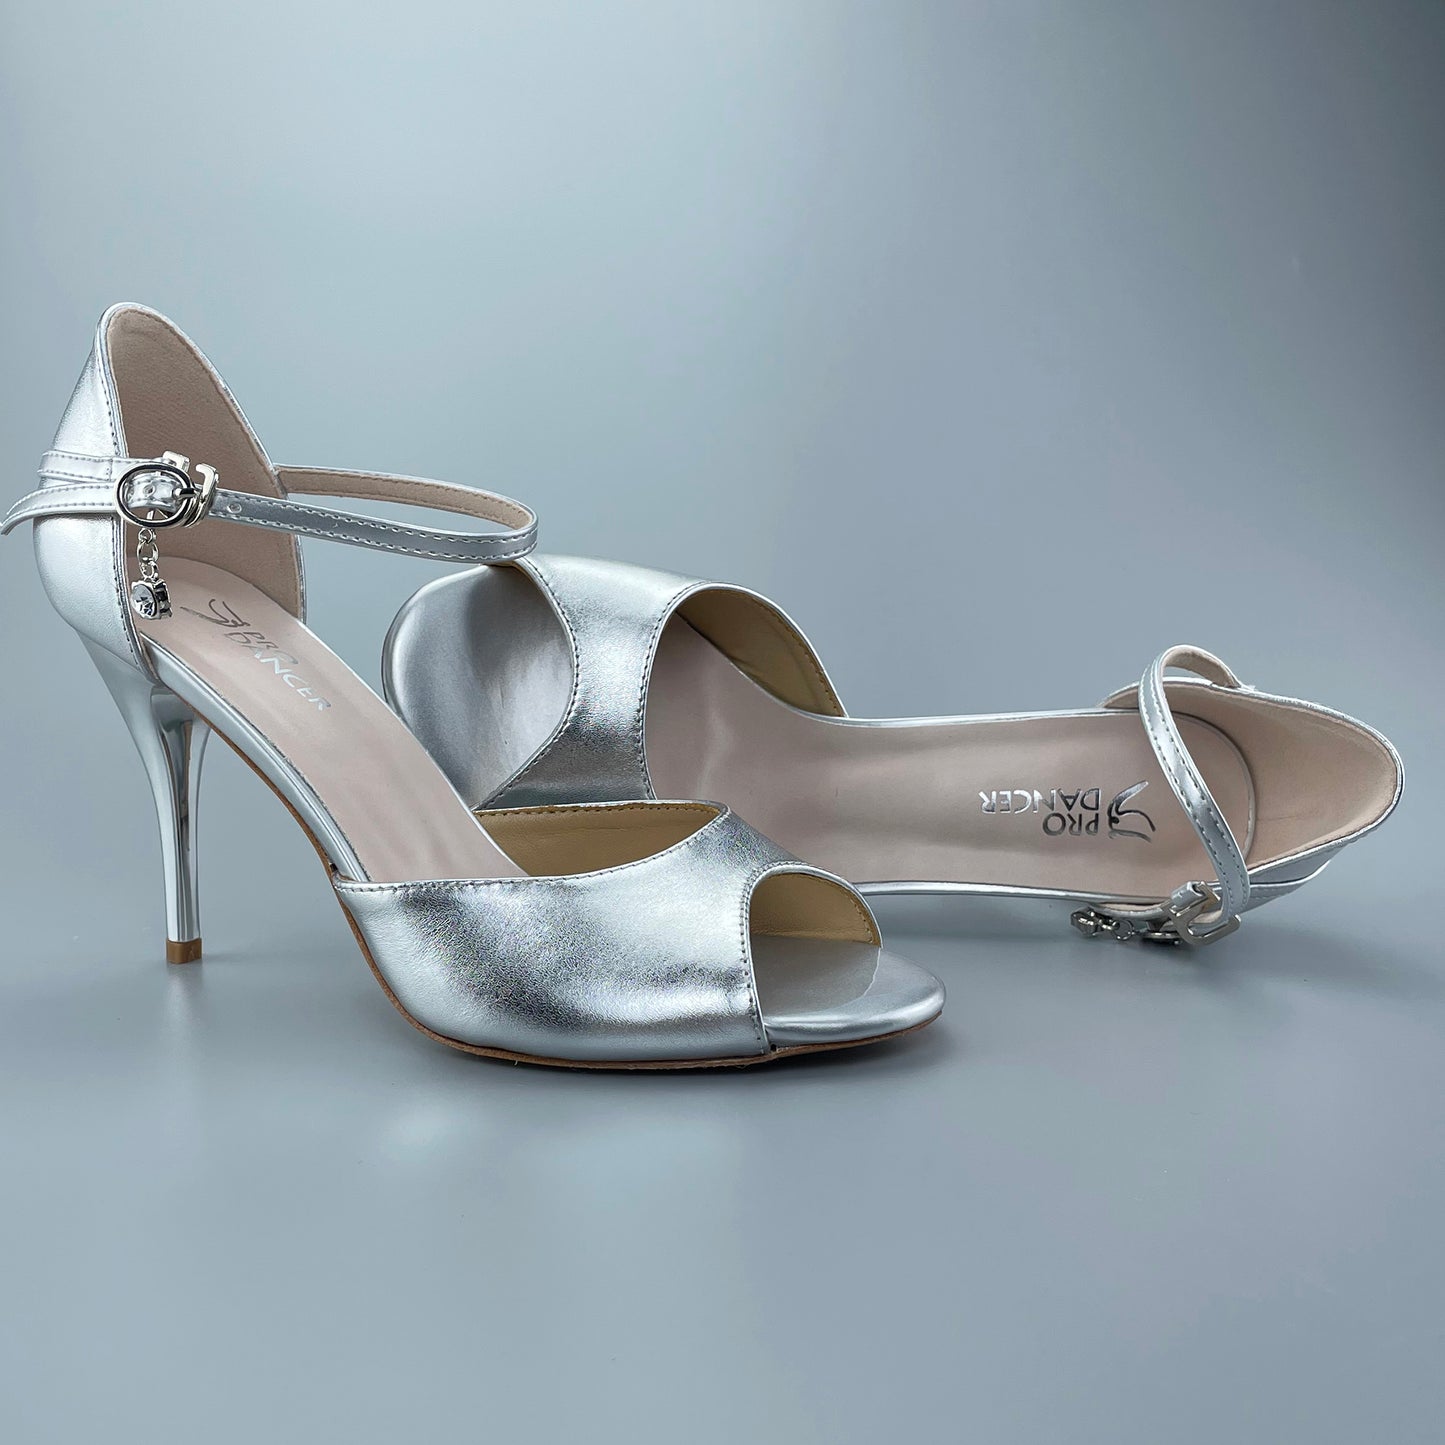 Pro Dancer Open-toe and Closed-back Argentine Tango Shoes High Salsa Heels Hard Leather Sole Sandals Silver (PD-9043A)